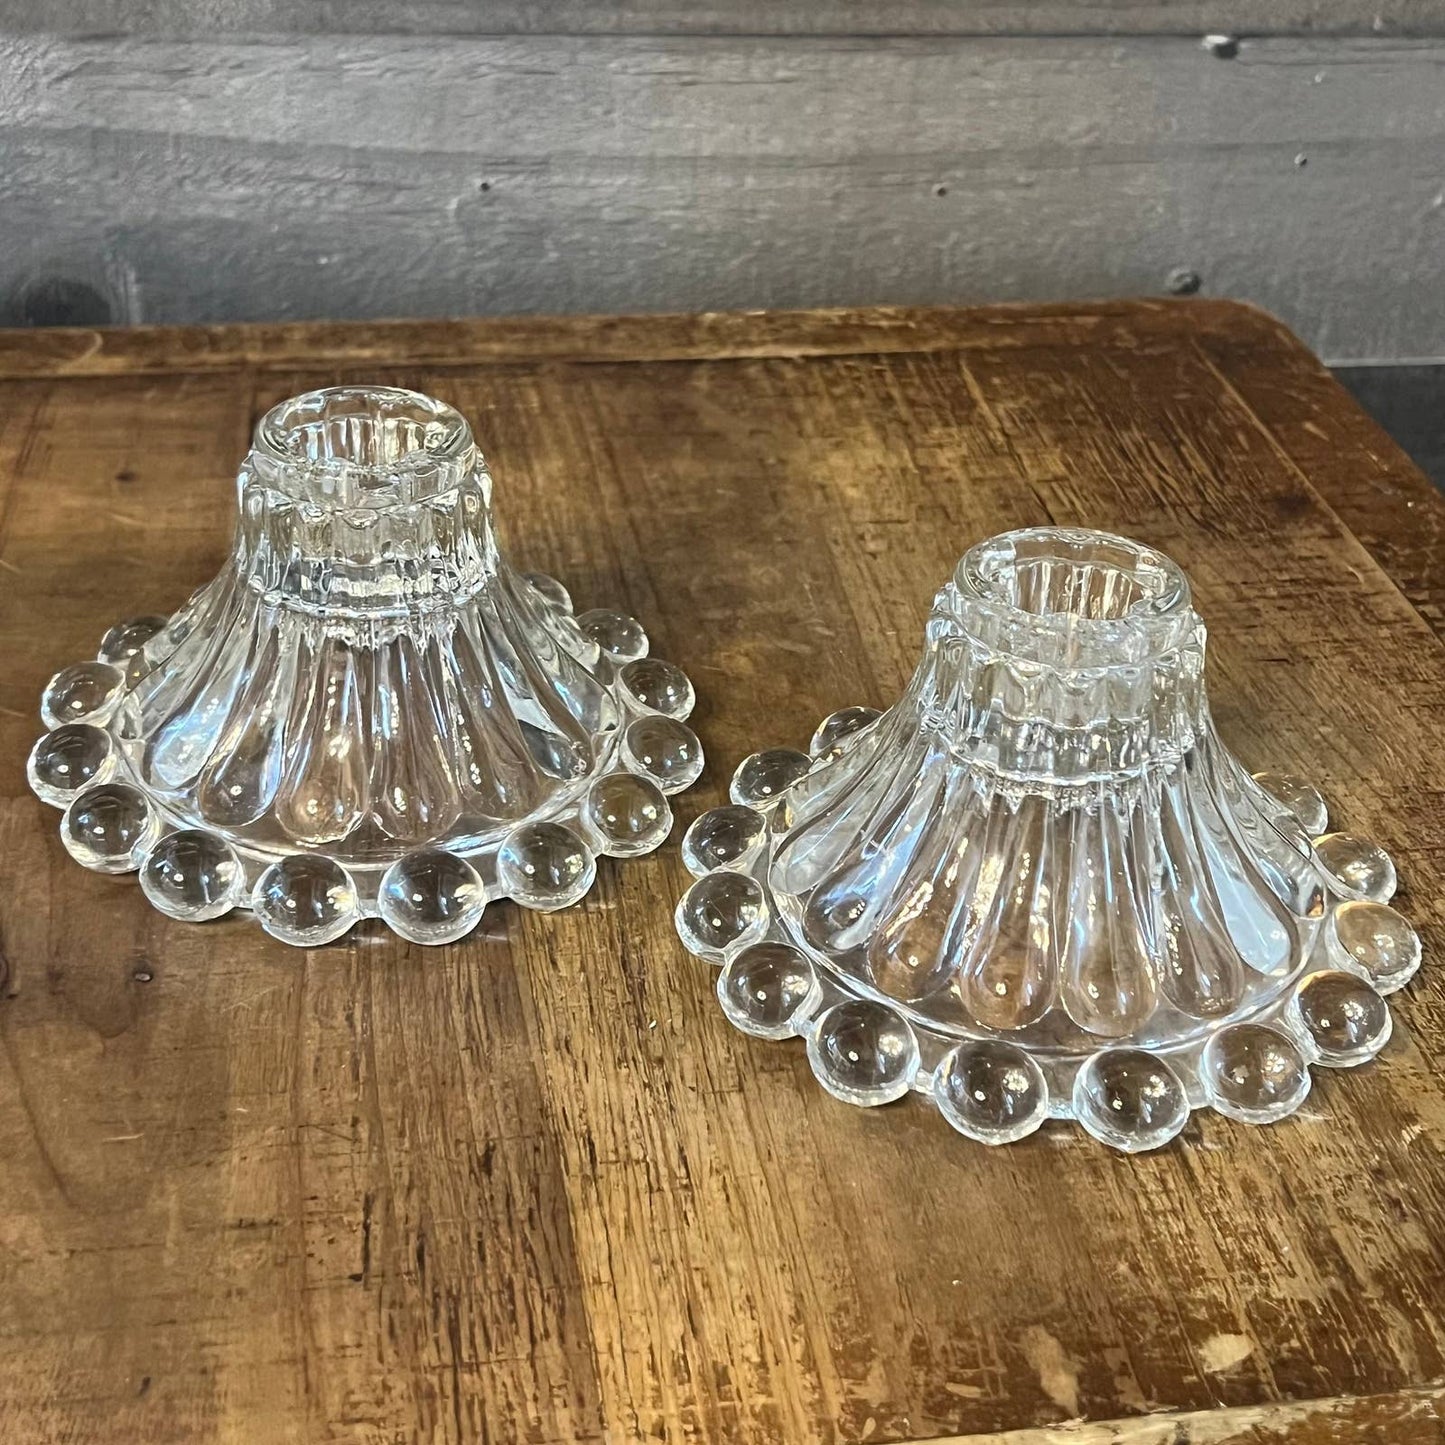 Anchor Hocking clear glass bubble rim candlestick holder pair